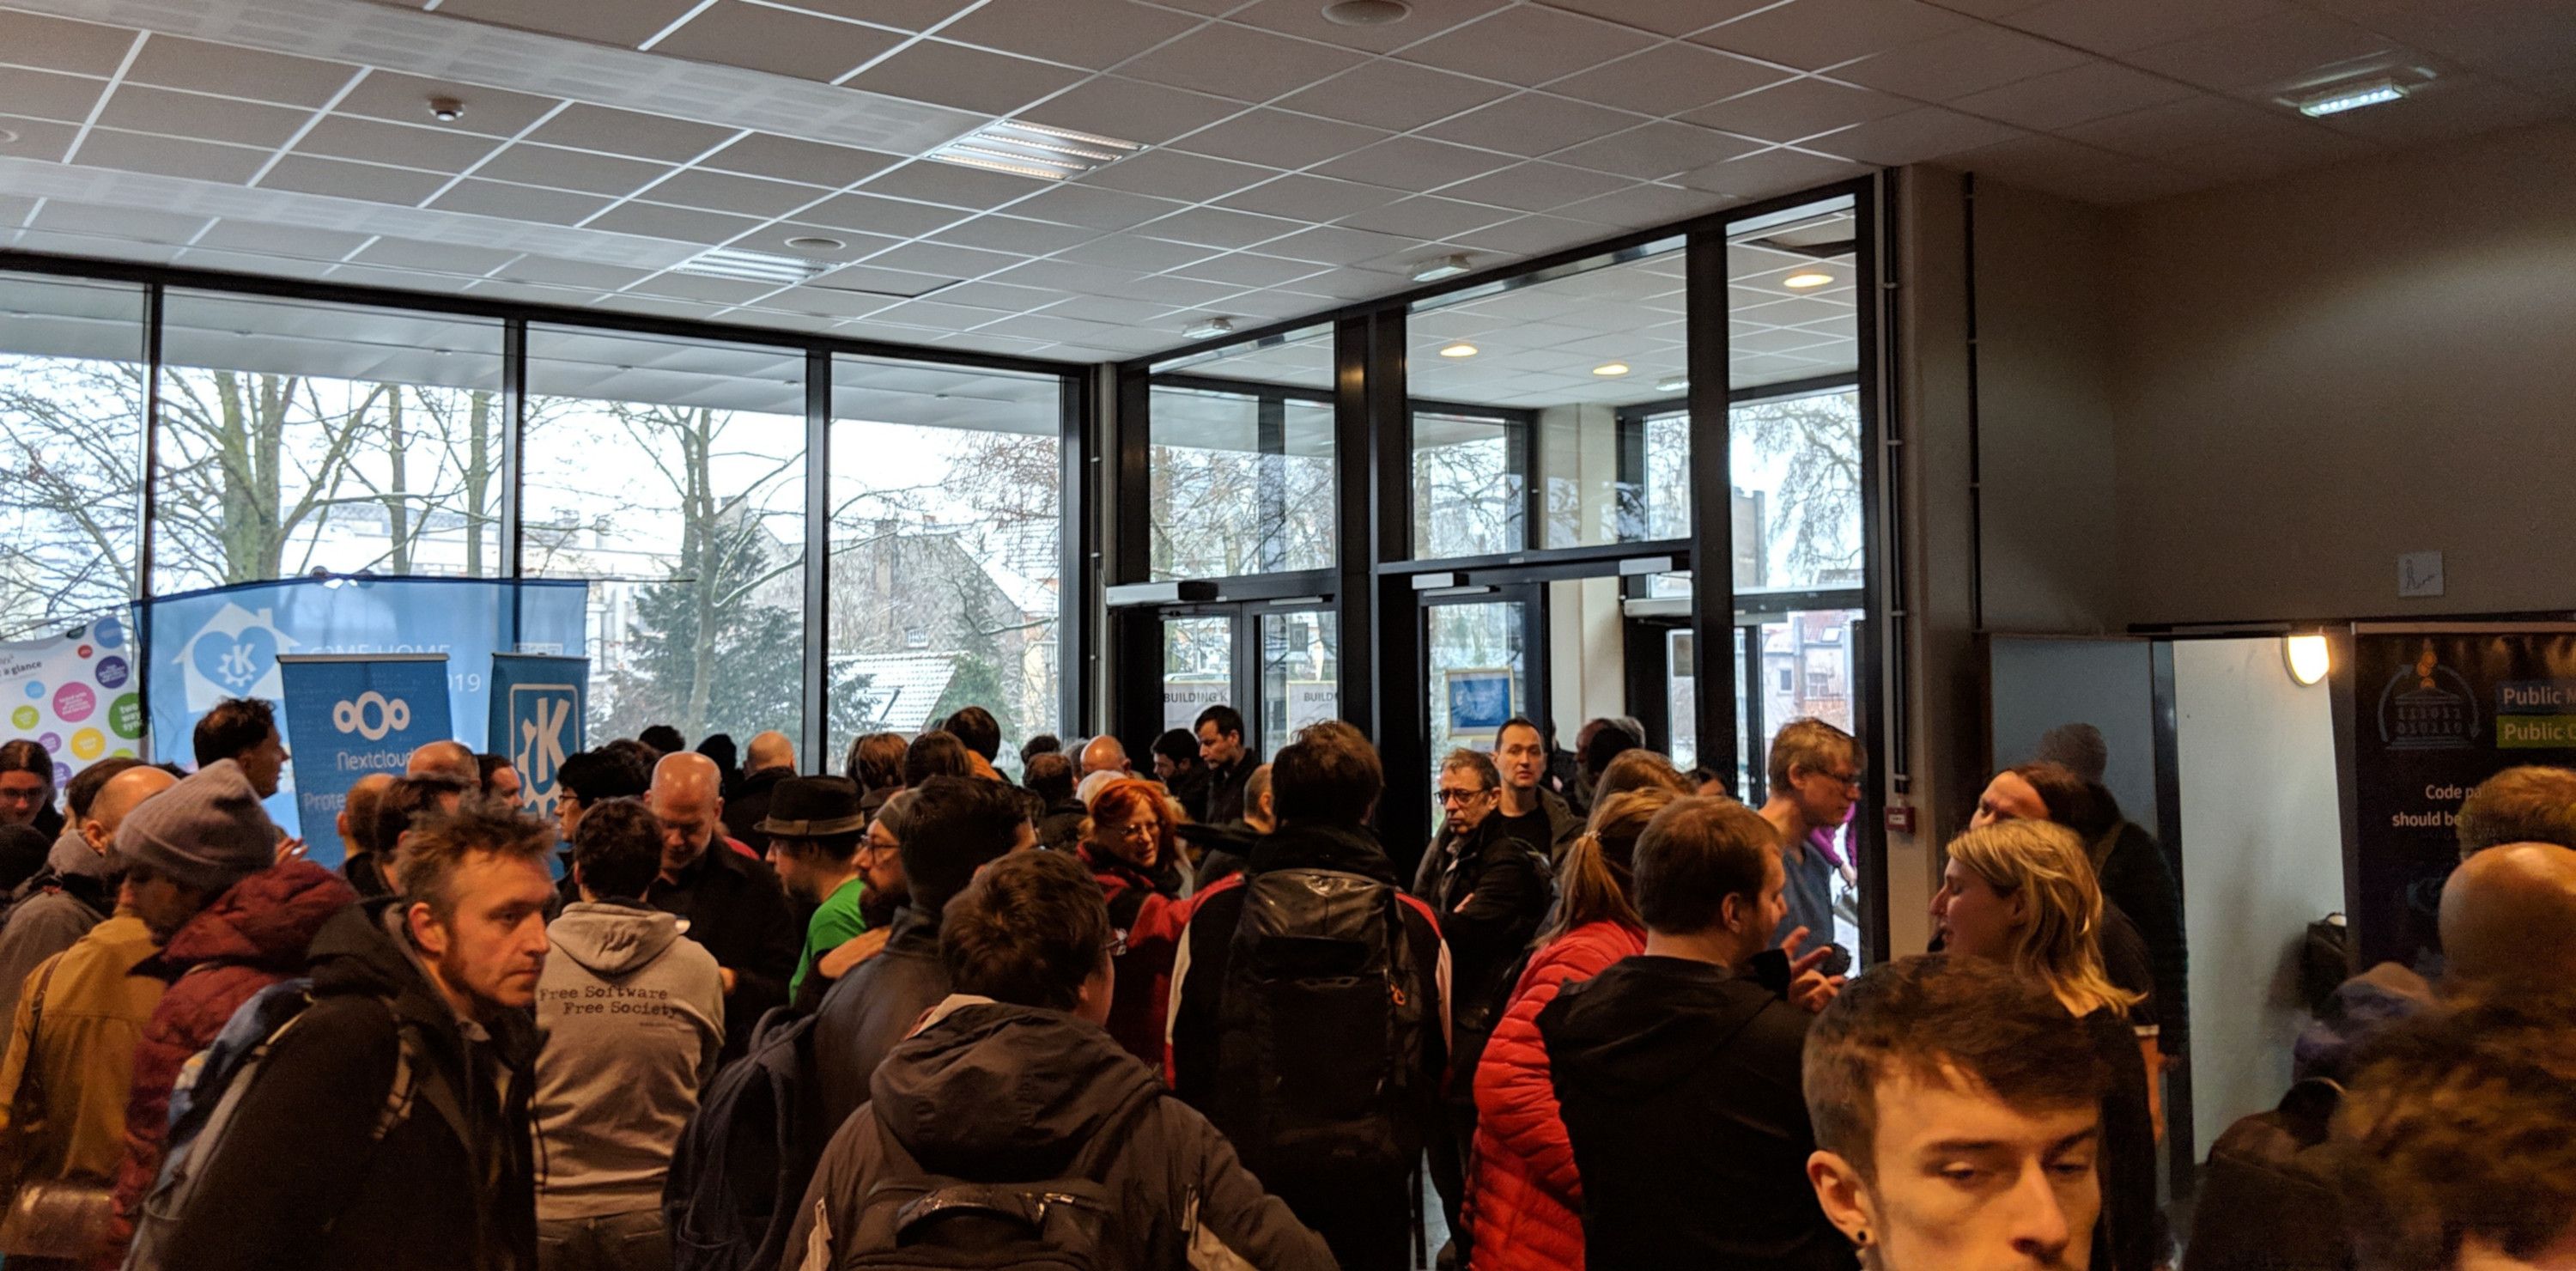 FOSDEM'19 Brussels - Booth area